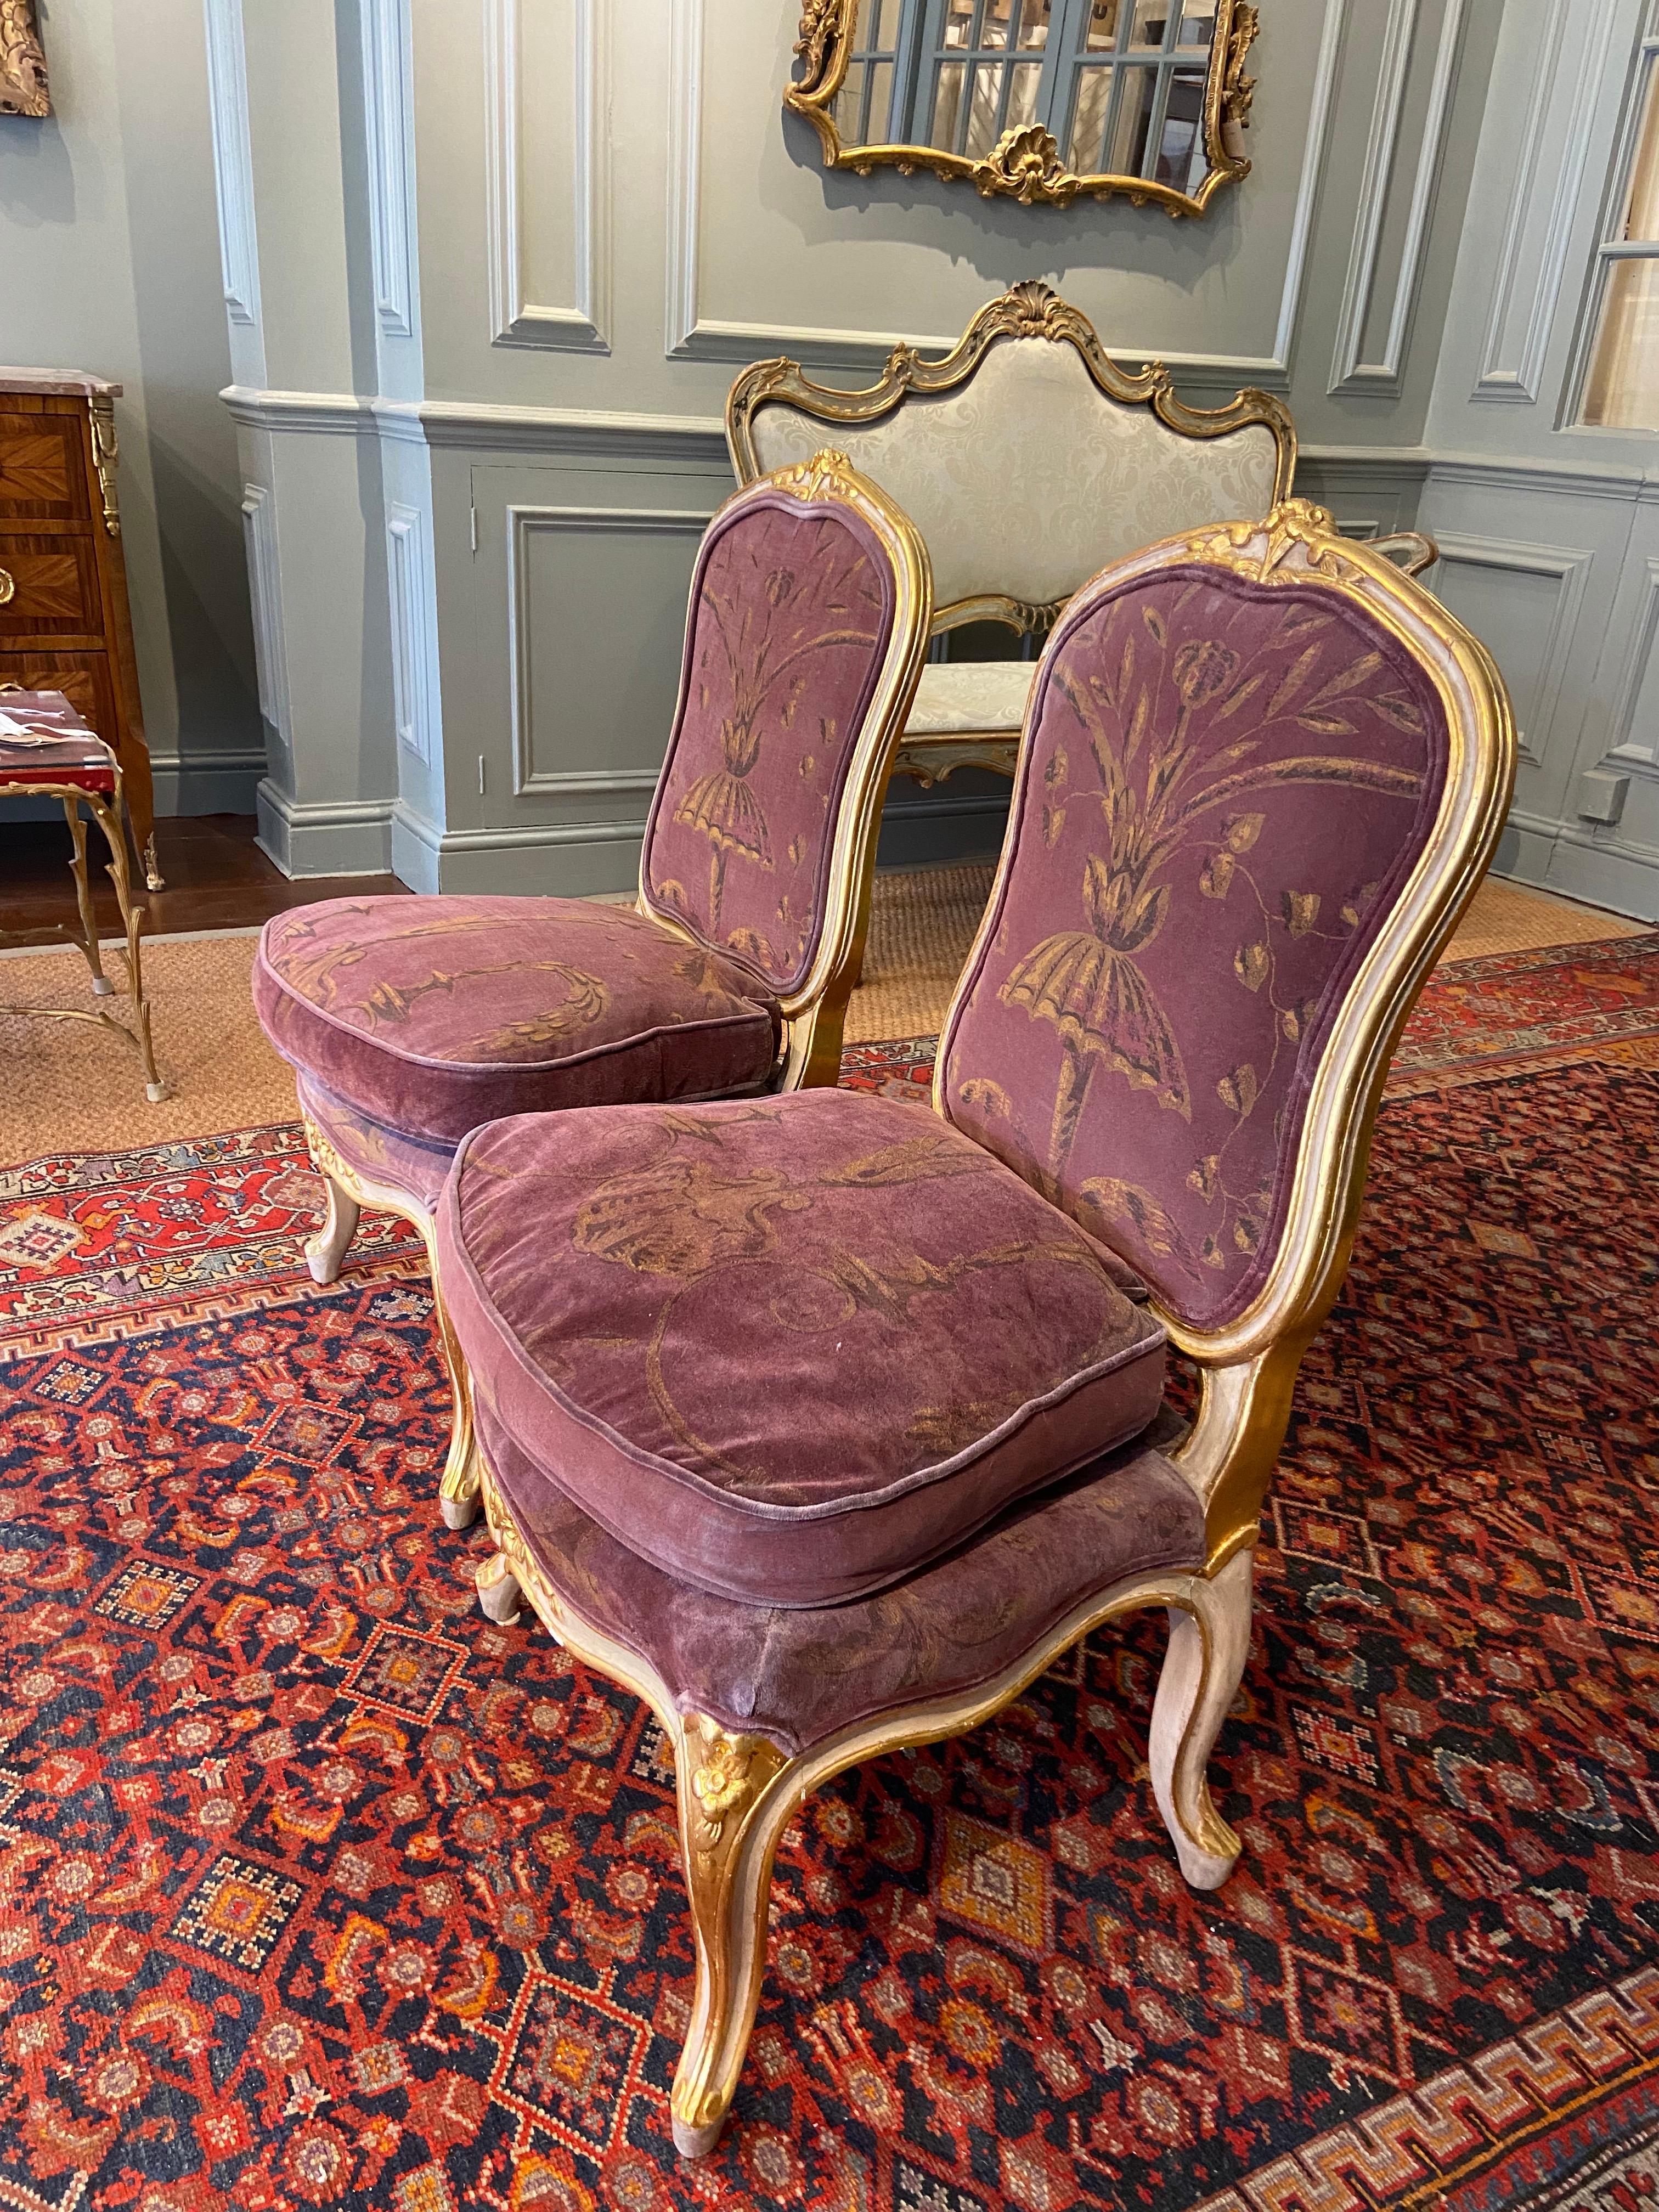 French Provincial A Pair of Louis XV Painted and Gilded Salon Chairs 'Mid 18th Century'